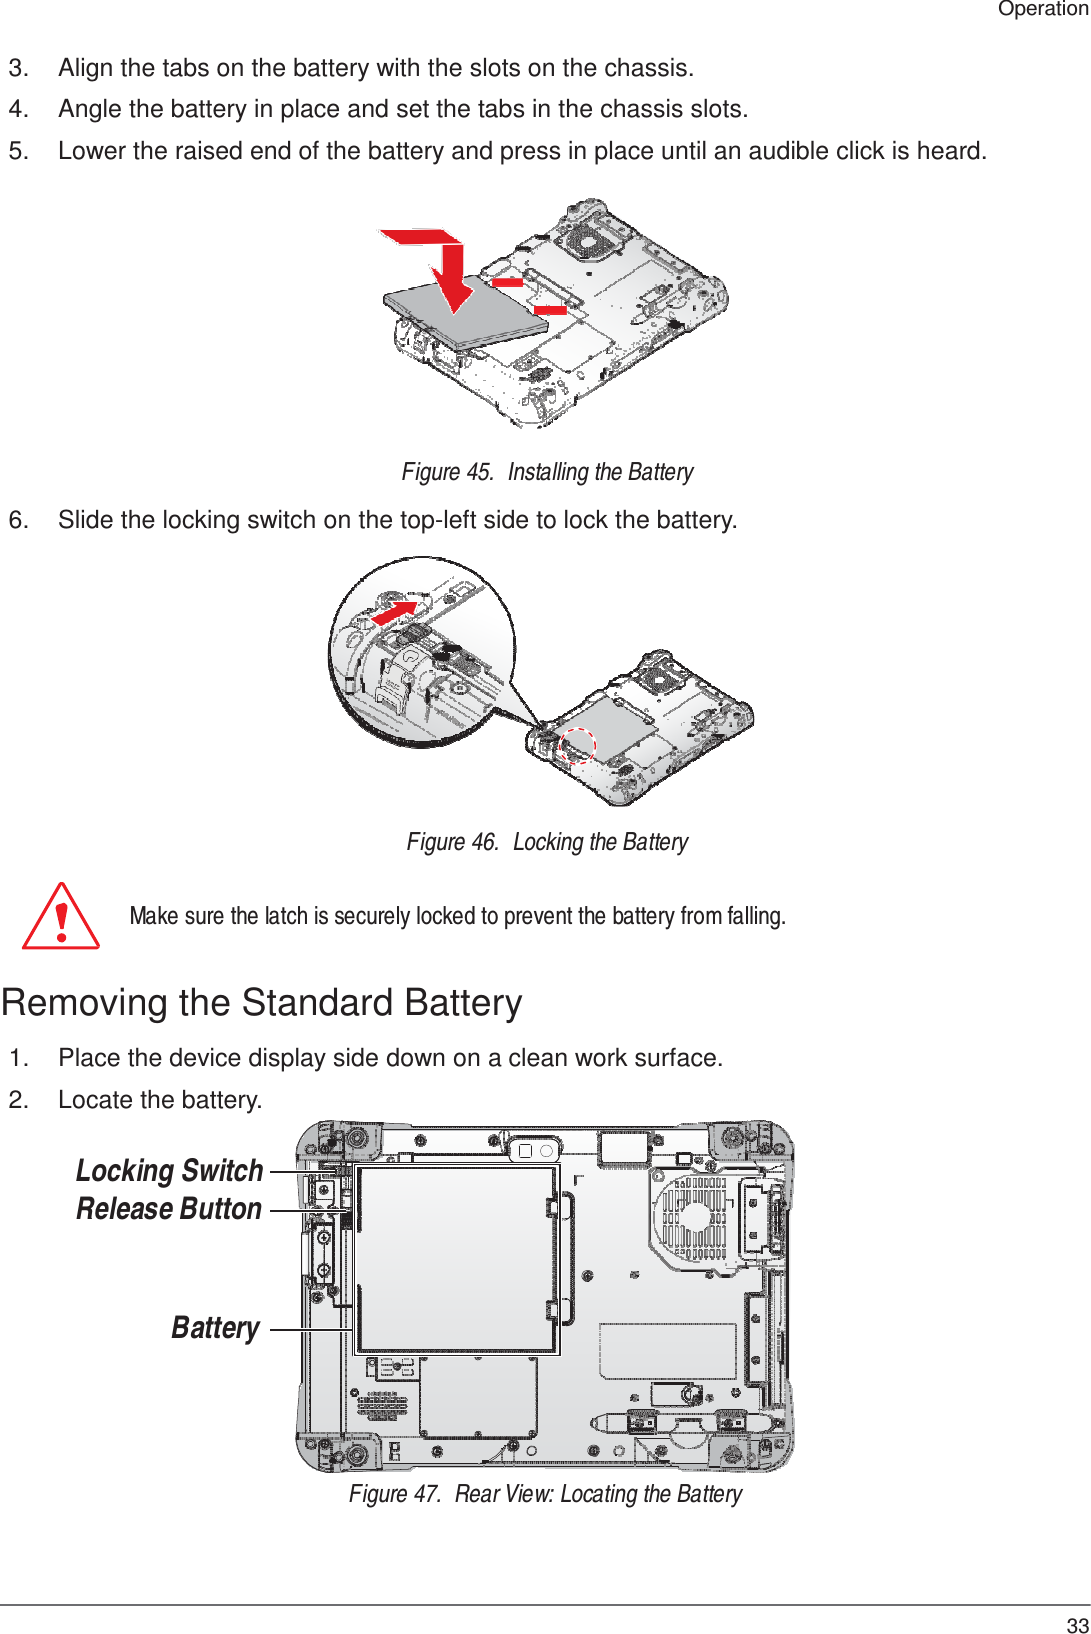 33 Operation    3.  Align the tabs on the battery with the slots on the chassis.  4.  Angle the battery in place and set the tabs in the chassis slots.  5.  Lower the raised end of the battery and press in place until an audible click is heard.               Figure 45.  Installing the Battery  6.  Slide the locking switch on the top-left side to lock the battery.               Figure 46.  Locking the Battery   Make sure the latch is securely locked to prevent the battery from falling.   Removing the Standard Battery  1.  Place the device display side down on a clean work surface.  2.  Locate the battery.   Locking Switch Release Button     Battery       Figure 47.  Rear View: Locating the Battery 